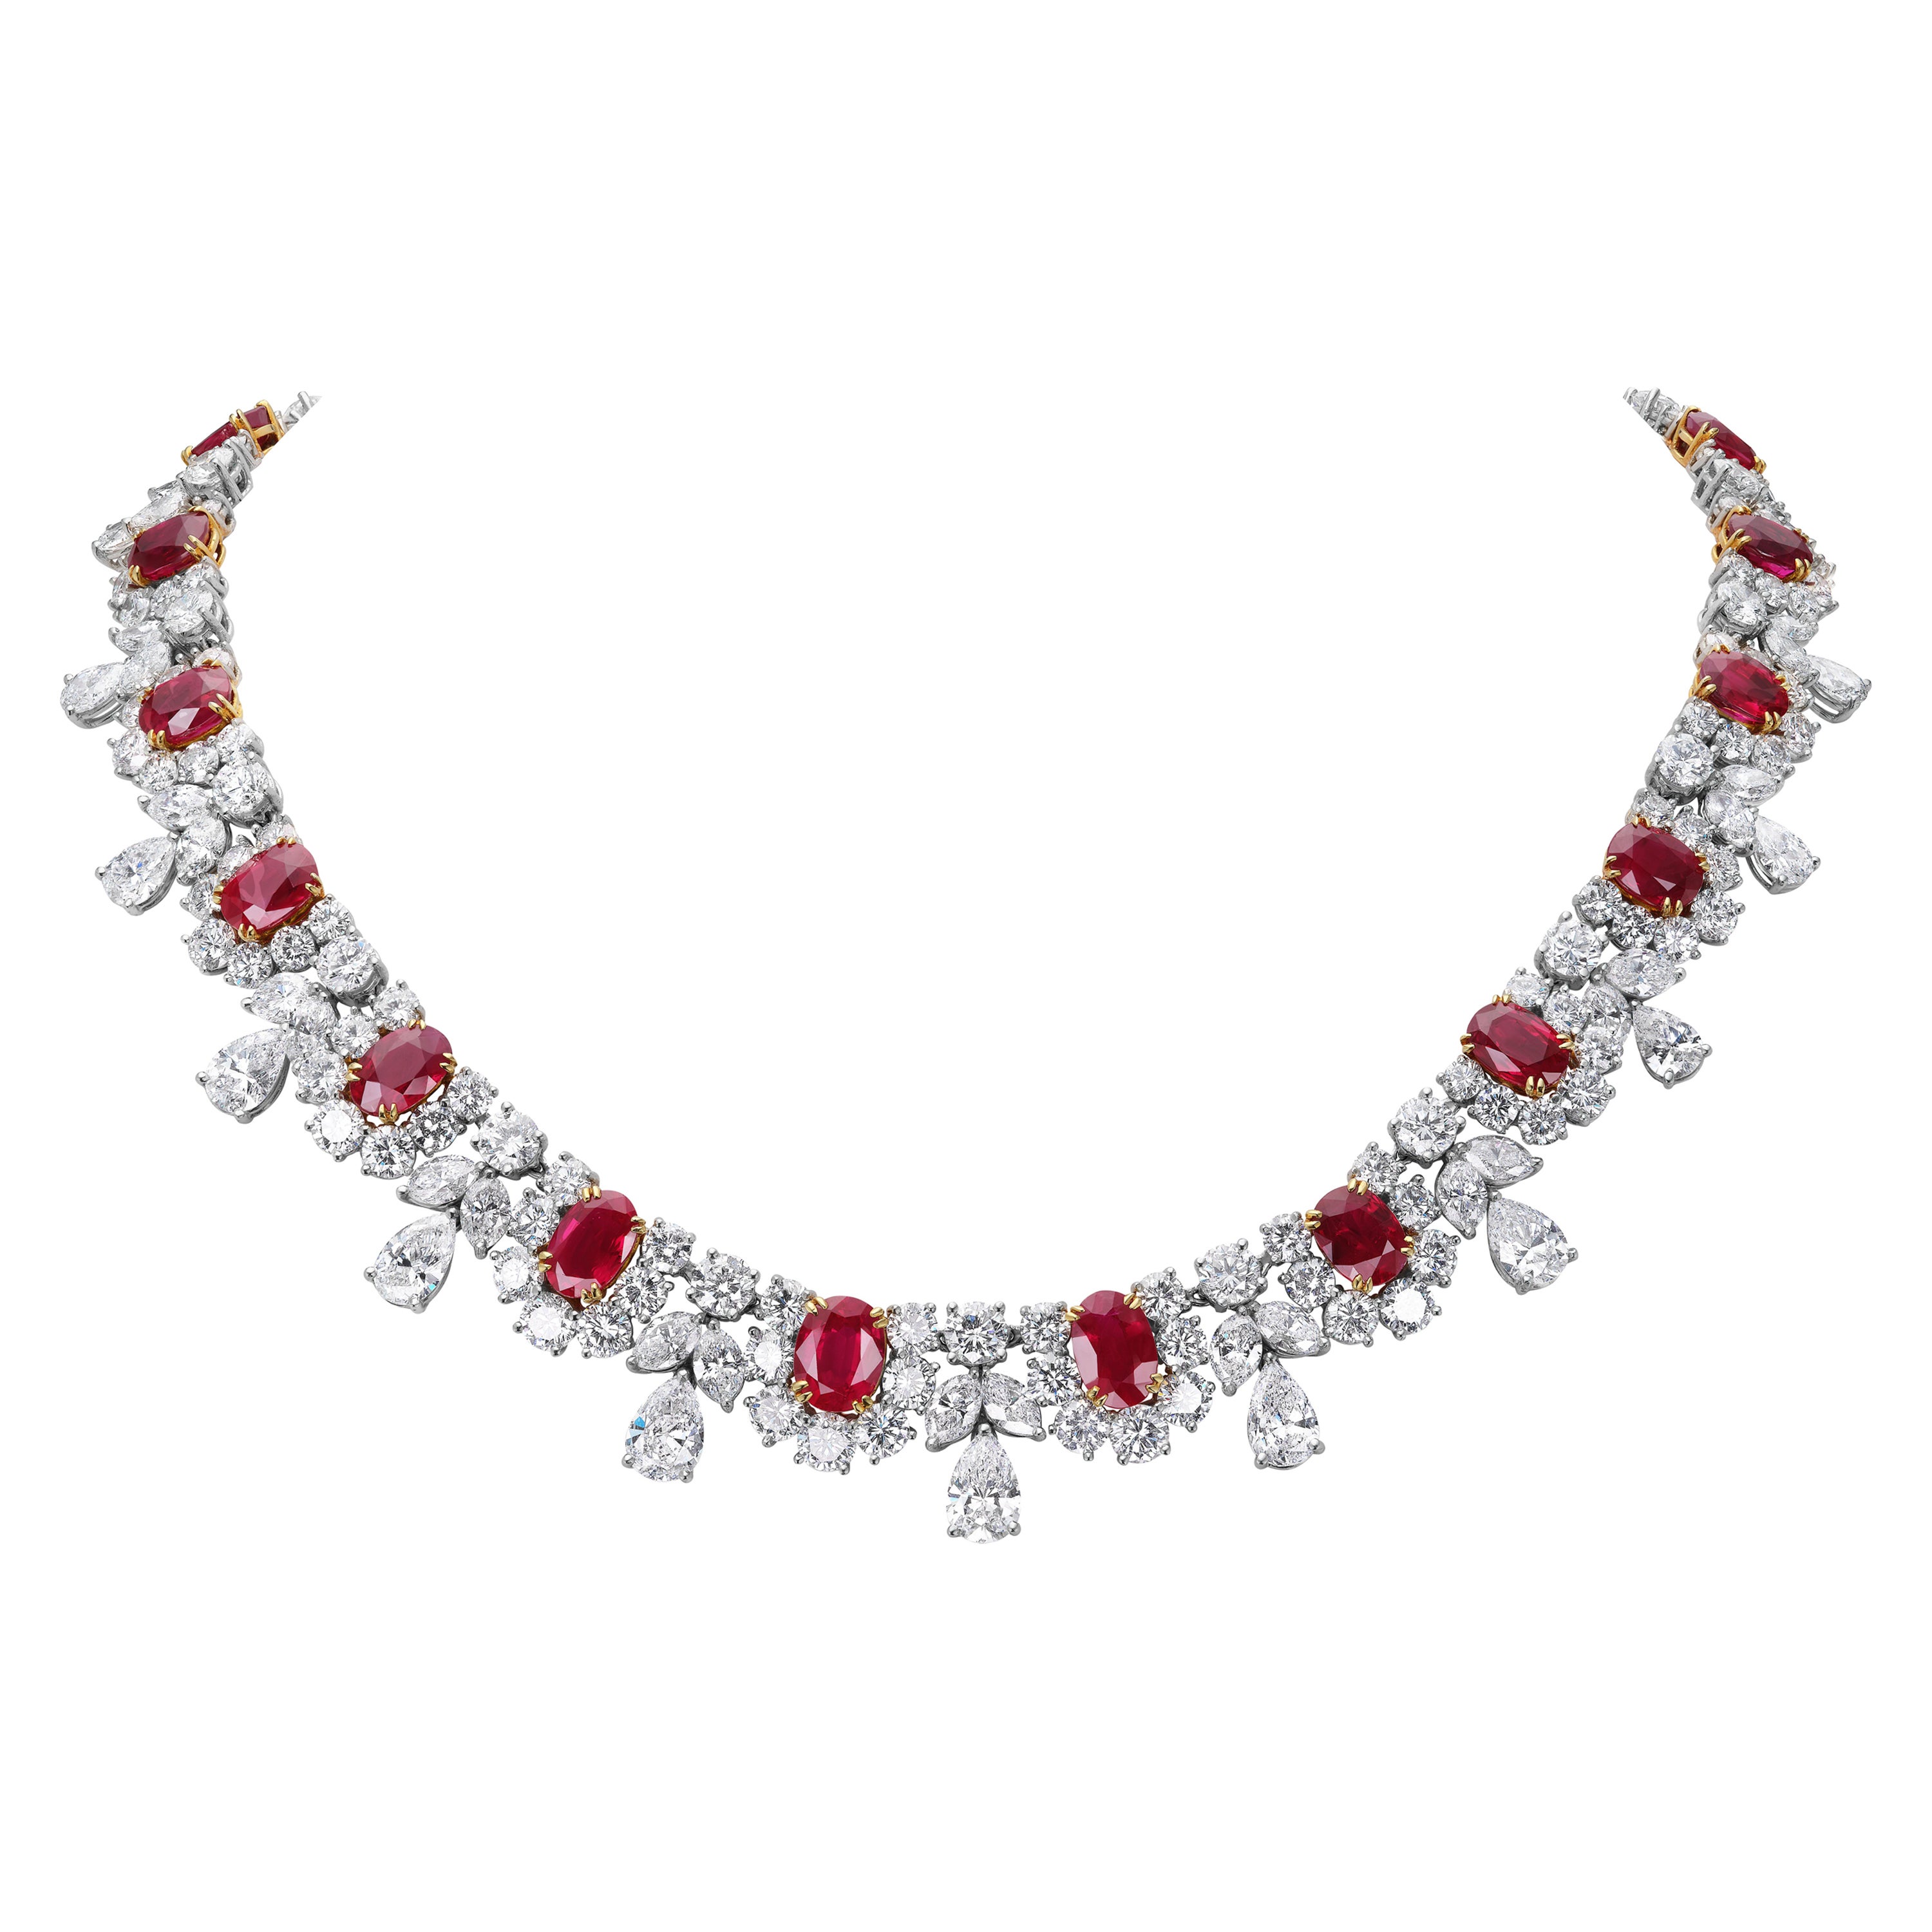 Burma Ruby and Diamond Cluster Necklace Platinum and 18K Gold